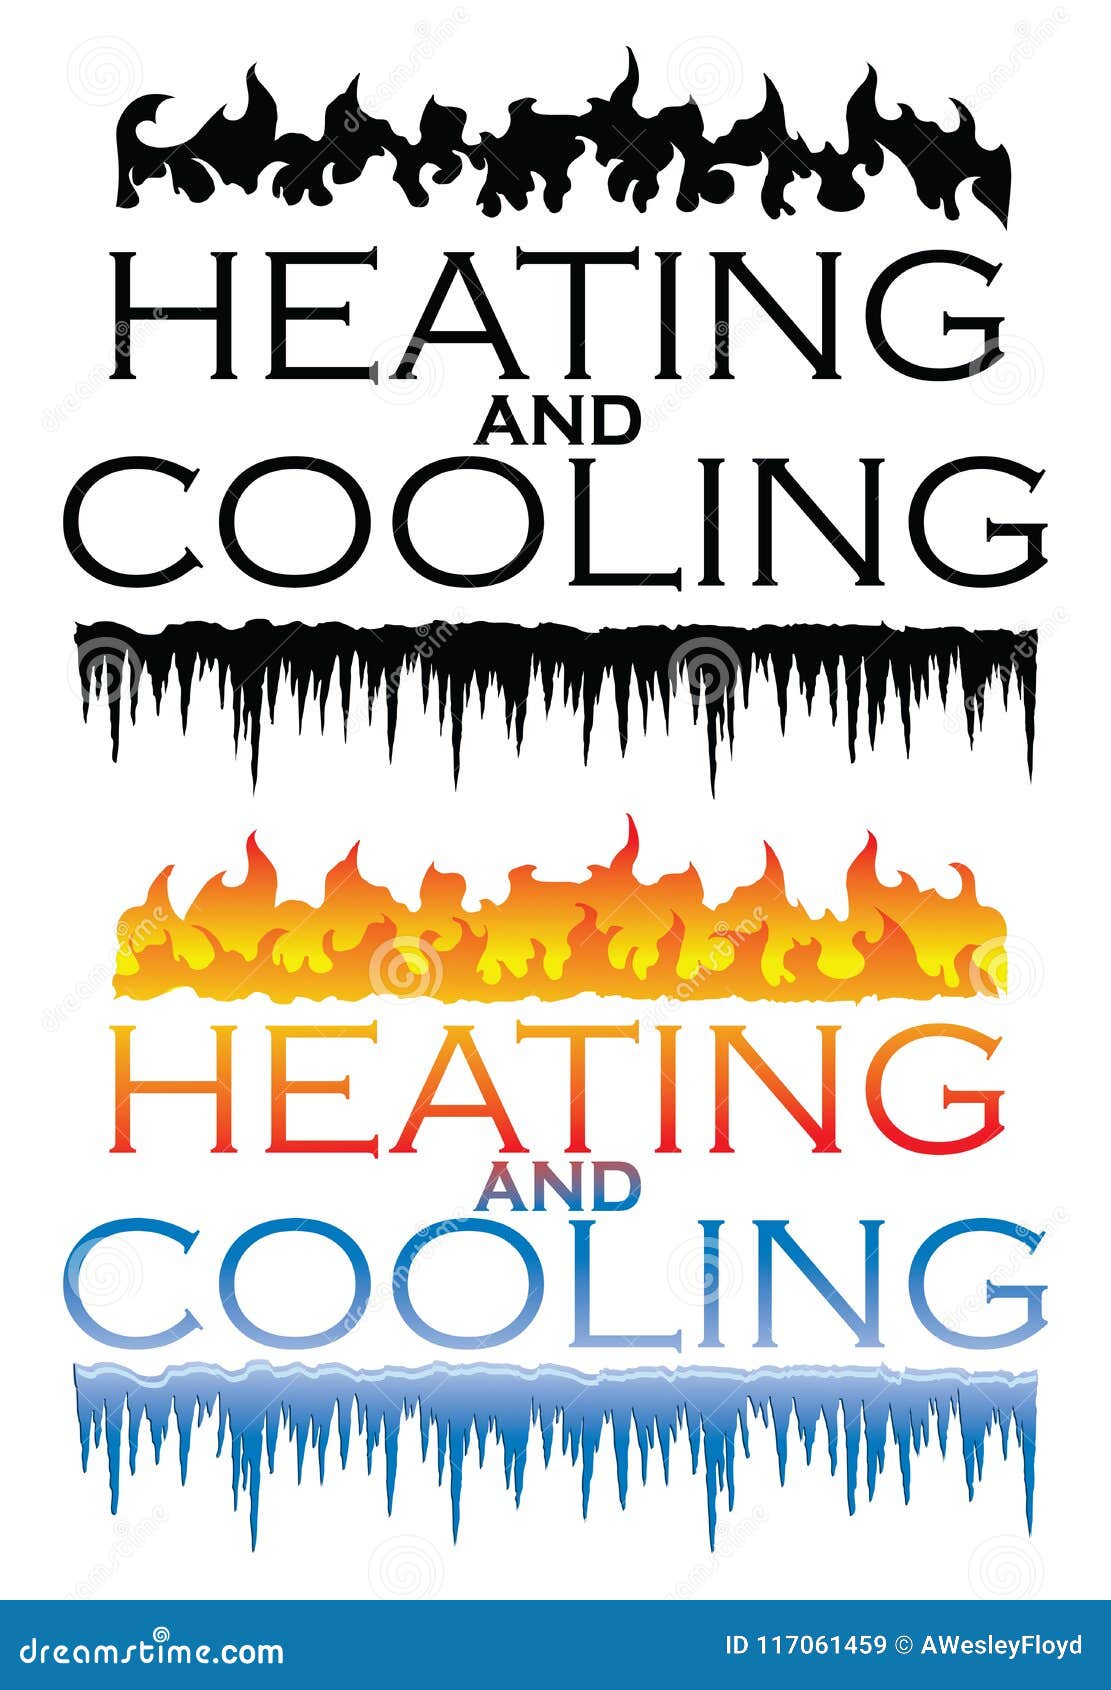 Optimizing Heating and Cooling Systems for Efficient Home Design